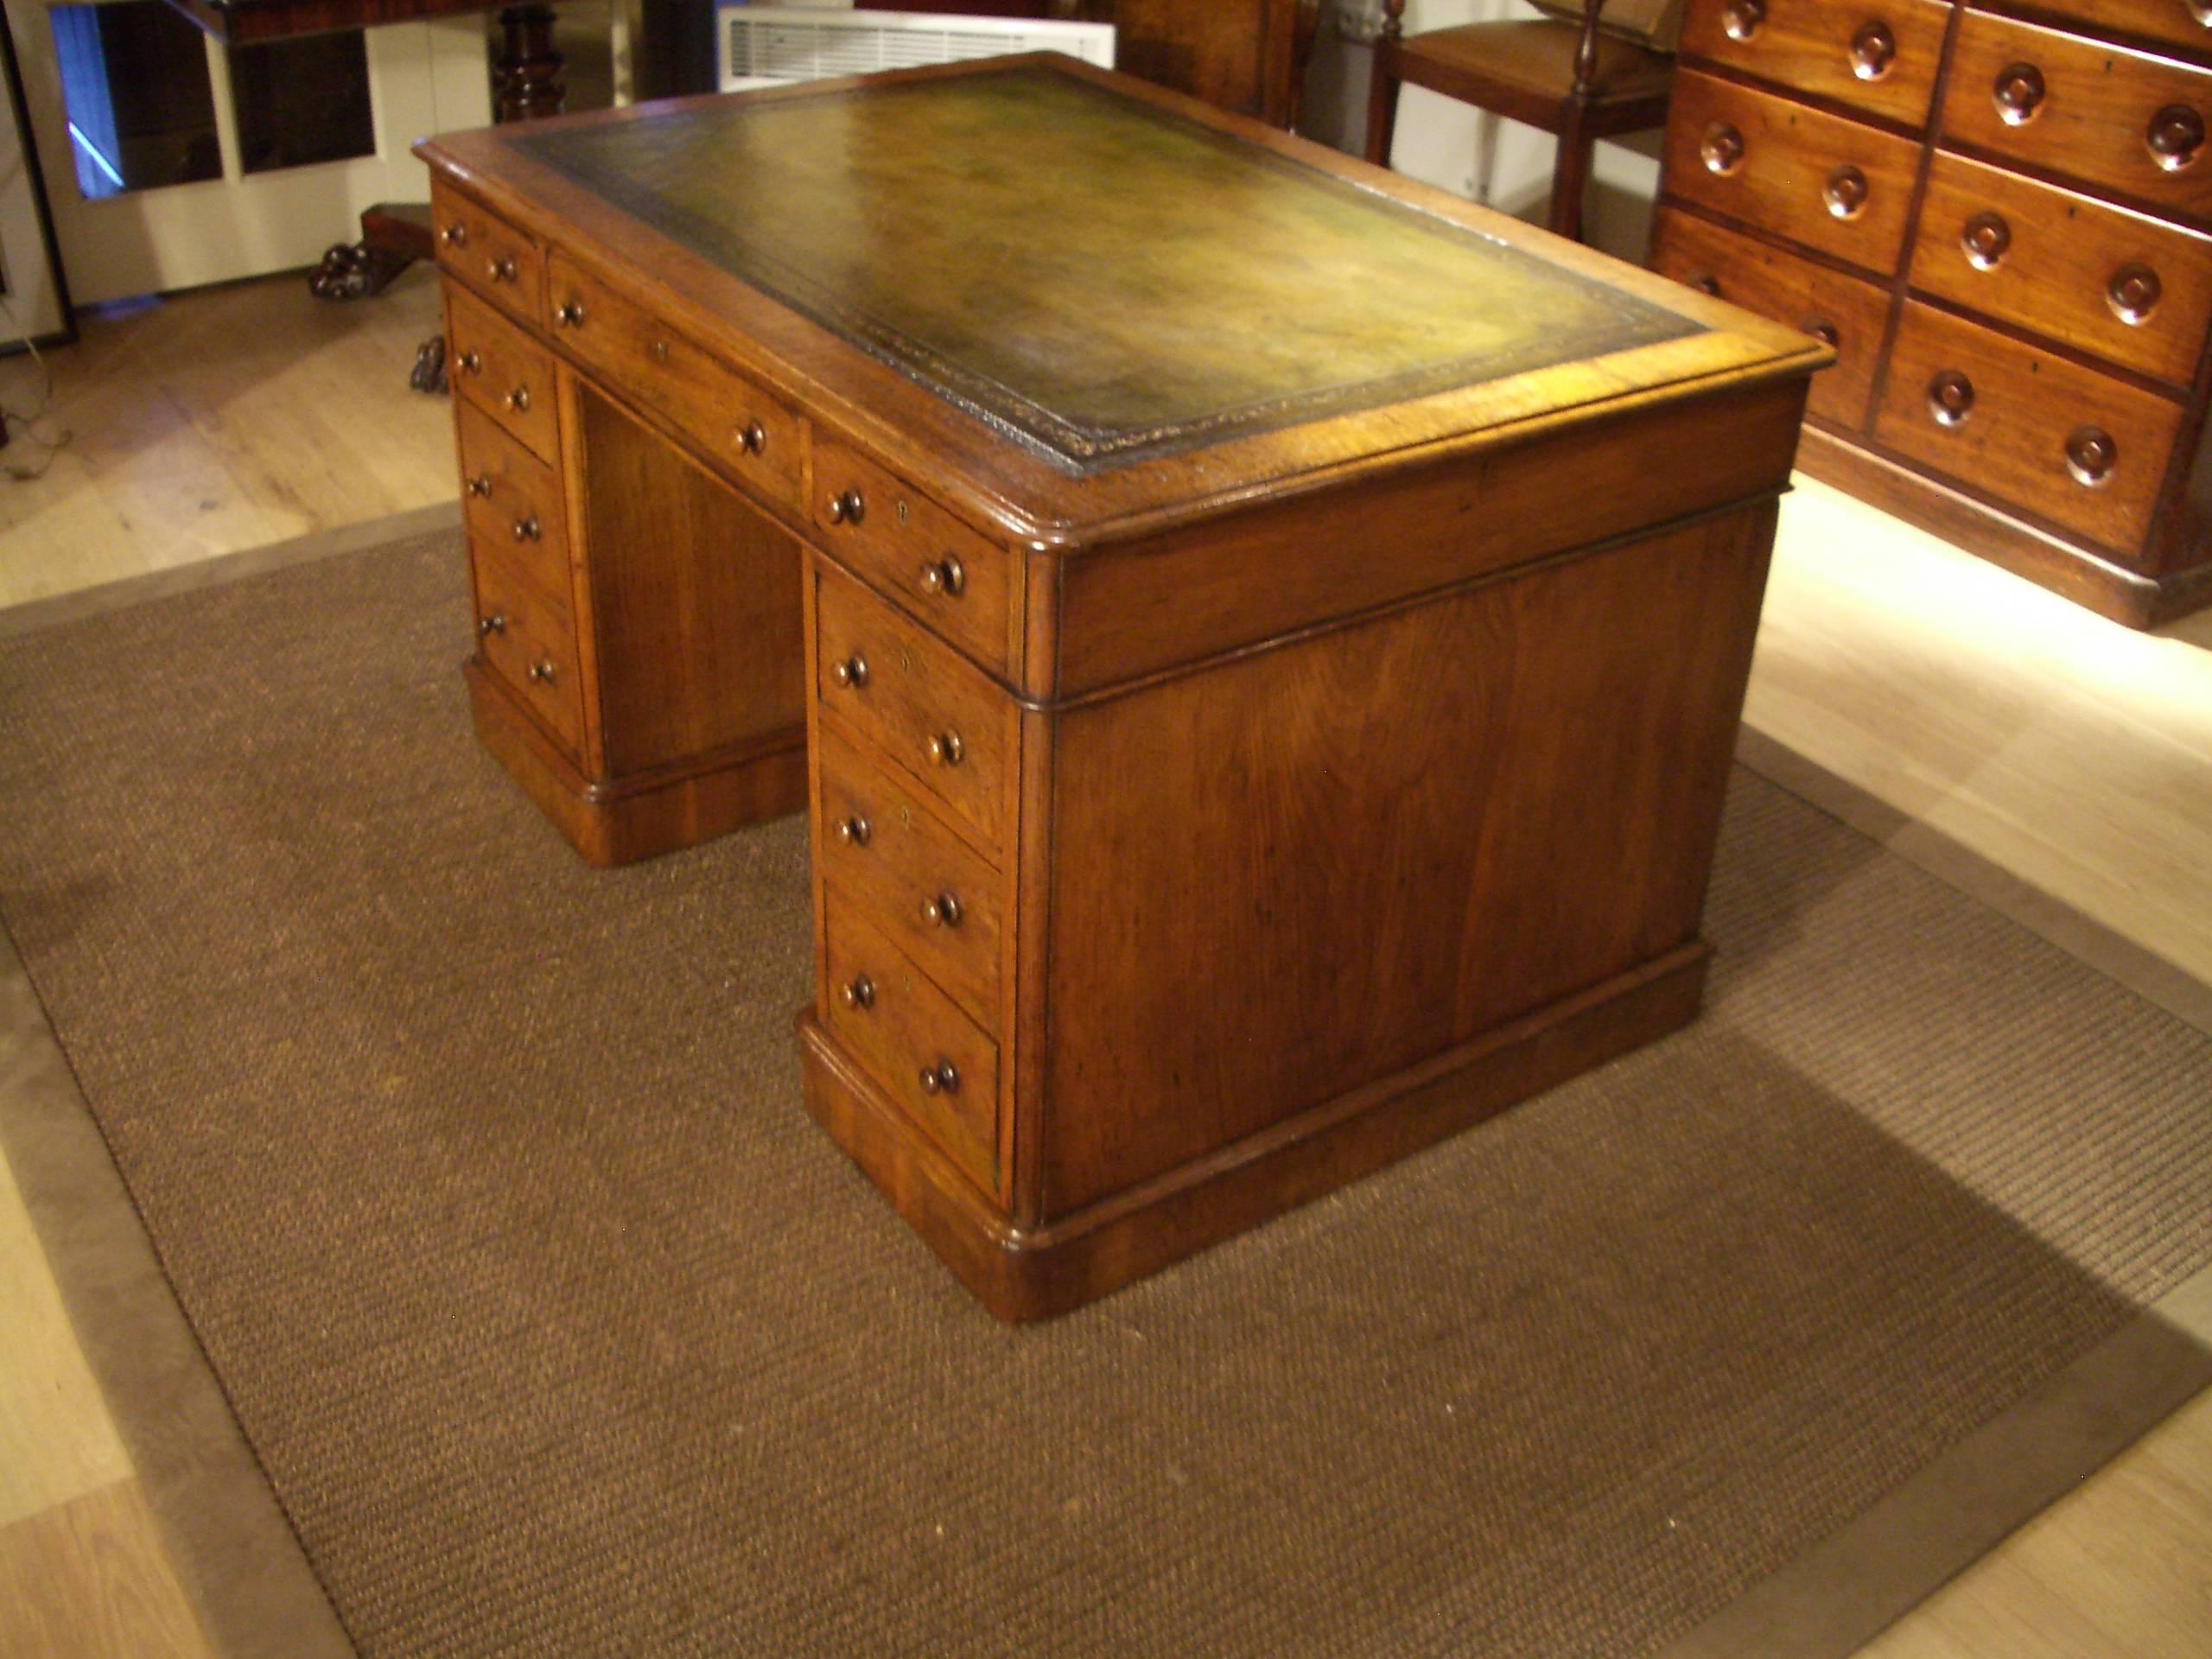 Beautiful antique oak desk in perfect condition. Beautiful weathered oak color. Desk top is with hand-colored green leather with faded gold profiling. It is an early Victorian desk with mahogany lining. The drawers are deep! Desk is finished on all